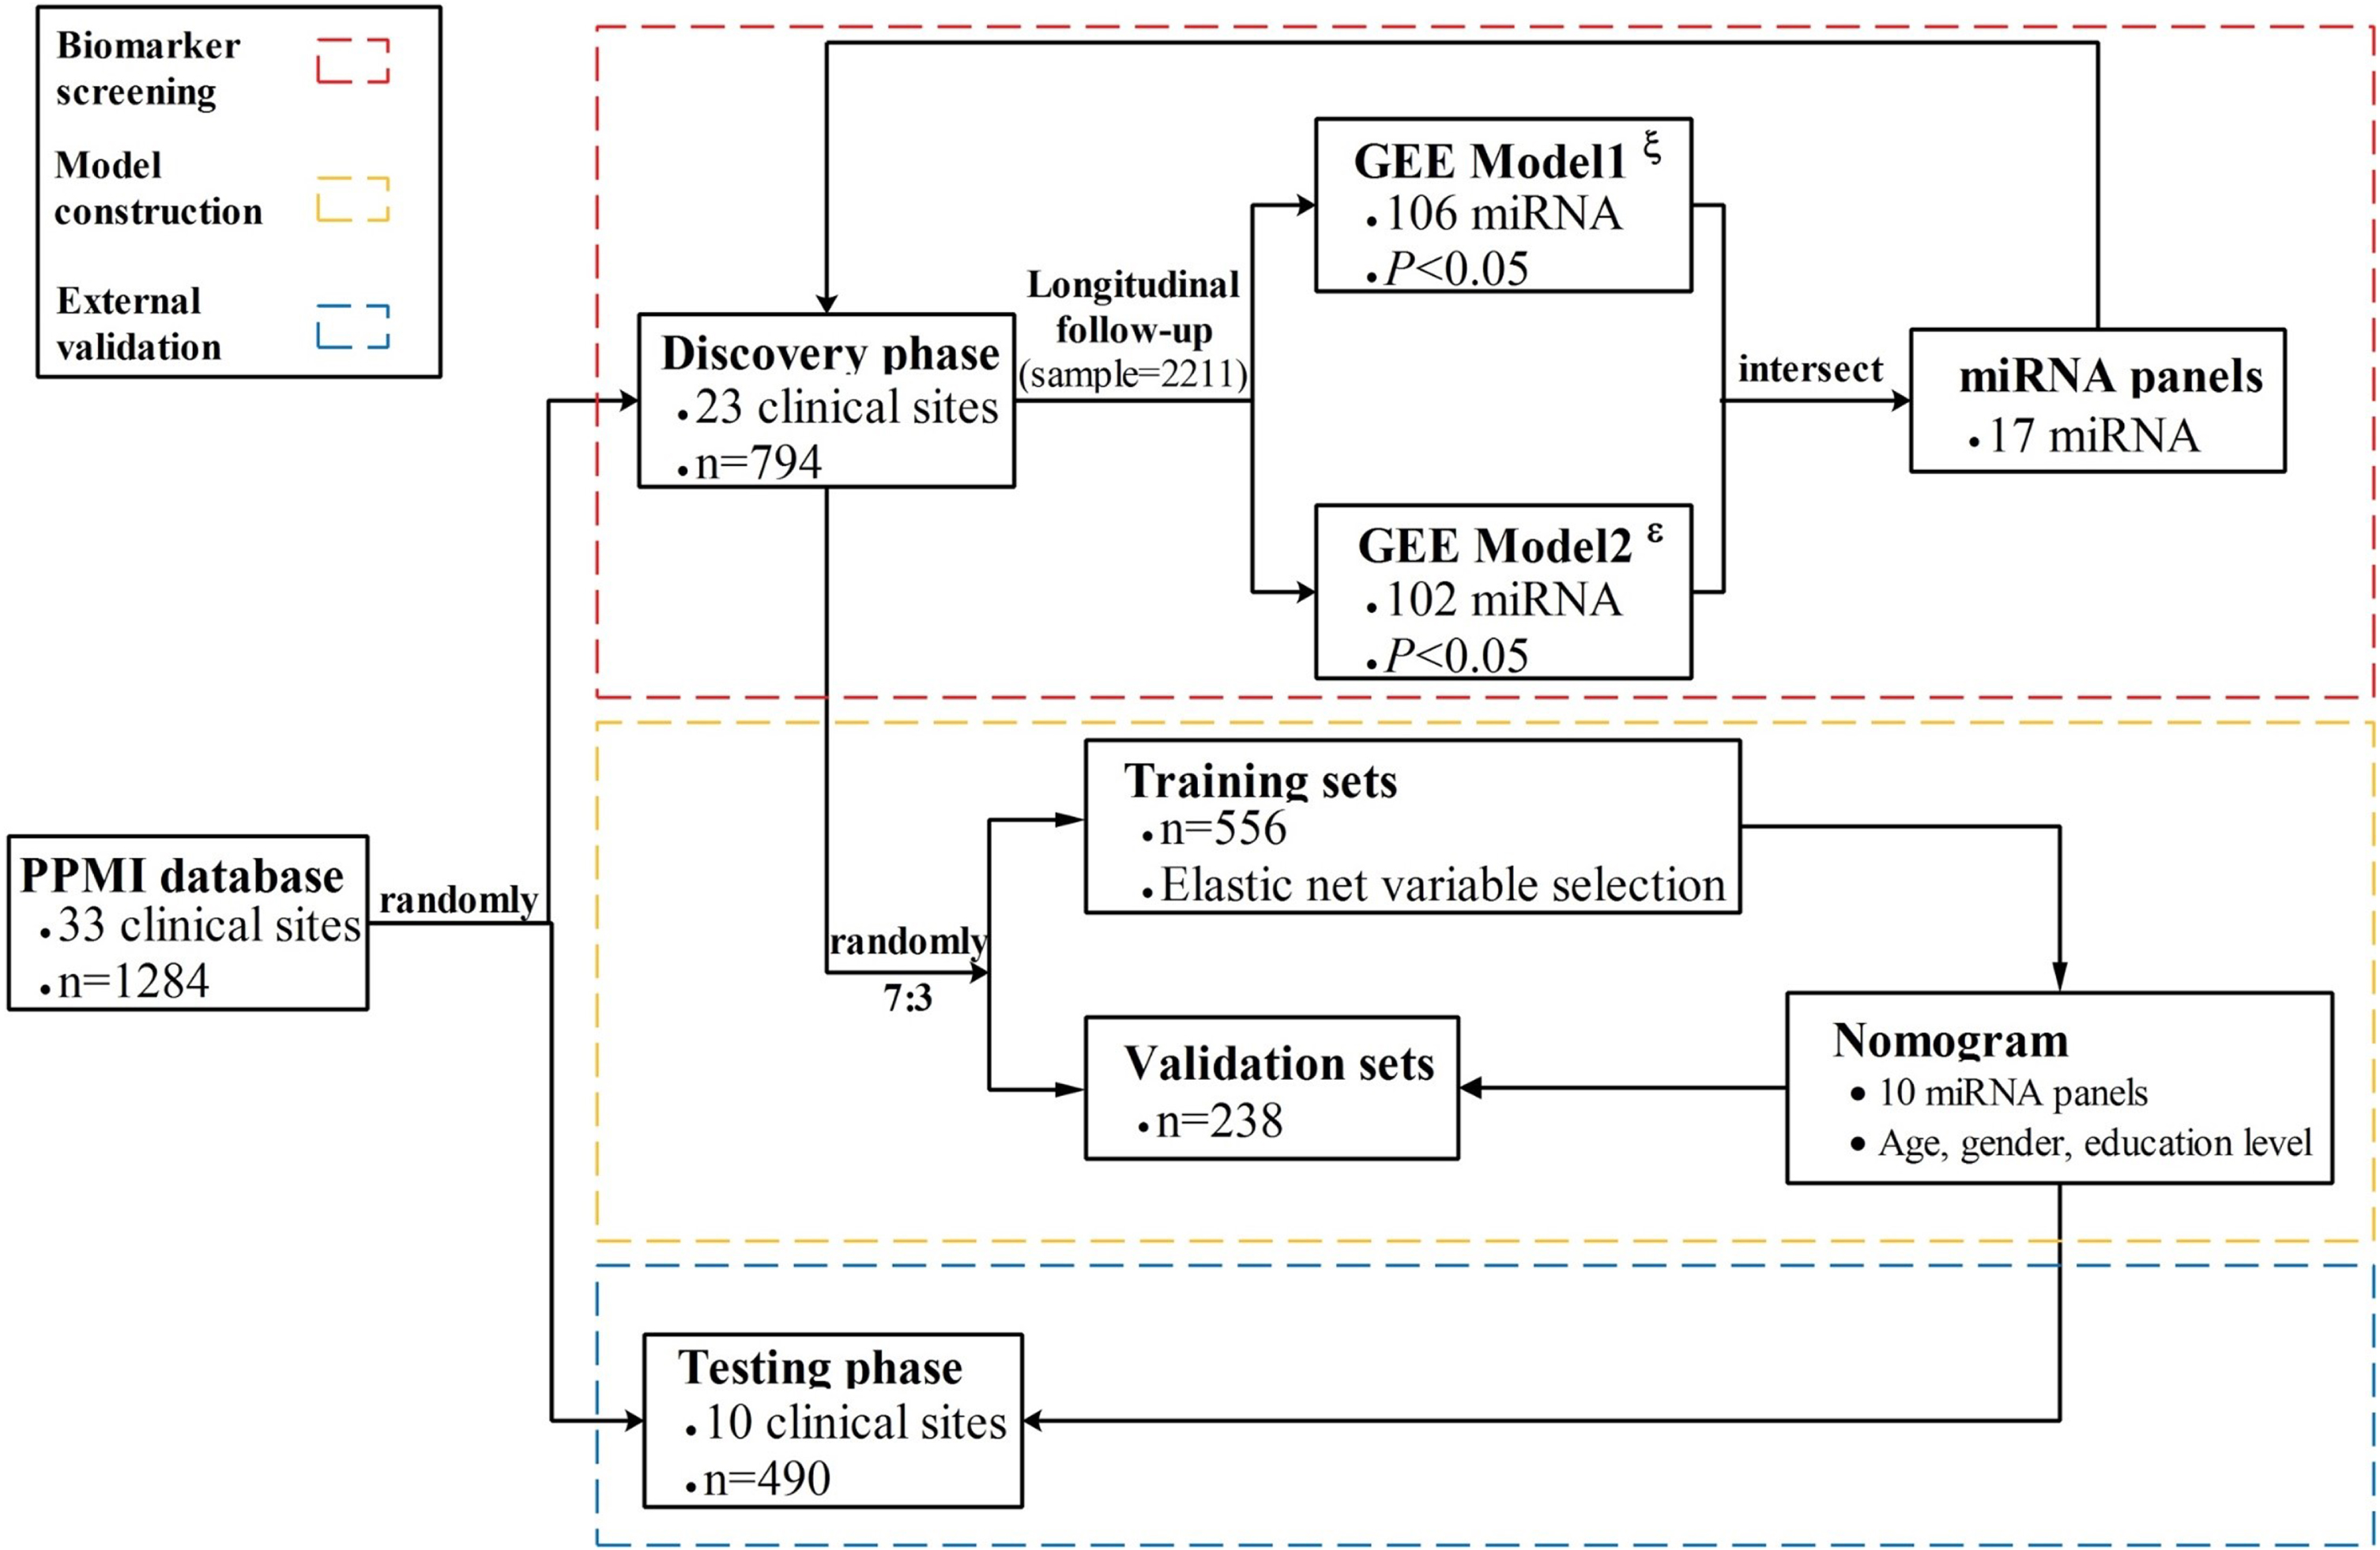 Flowchart of the study design. The nomogram was developed and validated in three phases, including biomarker screening, model construction, and external validation. For the biomarker screening phase, GEE model1ξ used the HY stages as an outcome indicator, while GEE model2ɛ used MDS-UPDRS as an outcome.